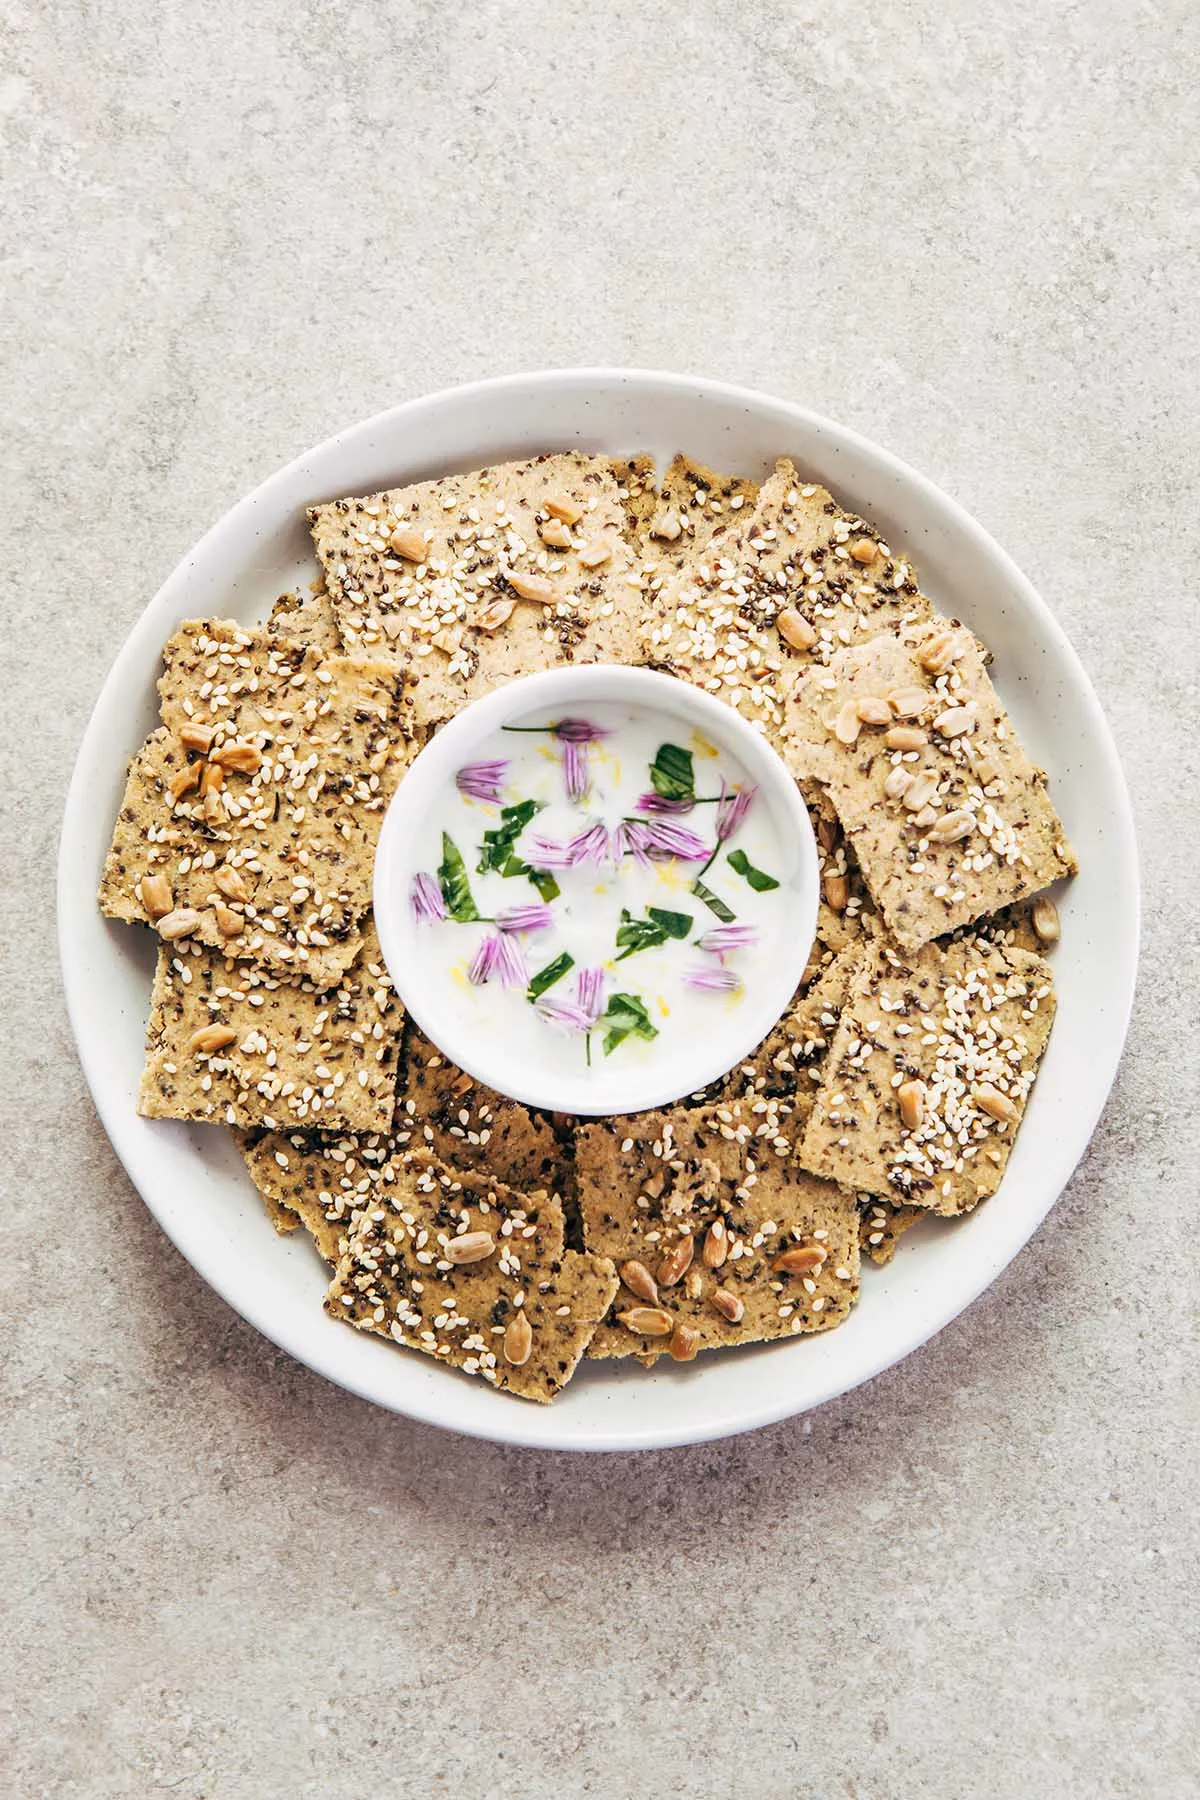 A plate of multi-seed oat flour crackers on a small white plate with a bowl of lemon herb yogurt dip in the middle of the plate.